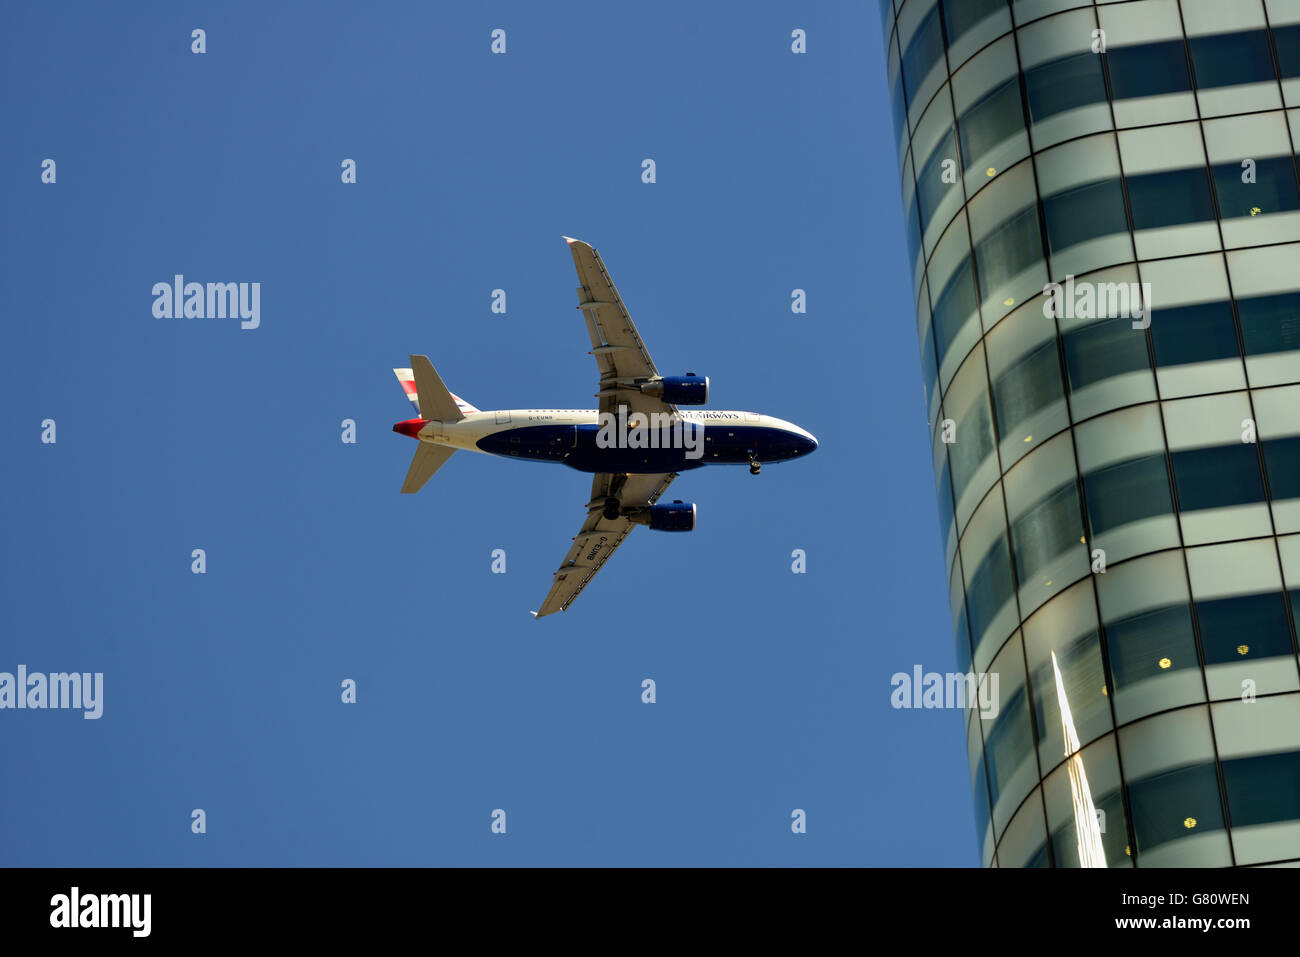 Passenger aeroplane approaching City Airport, Canary Wharf Estate, Docklands, East London, United Kingdom Stock Photo